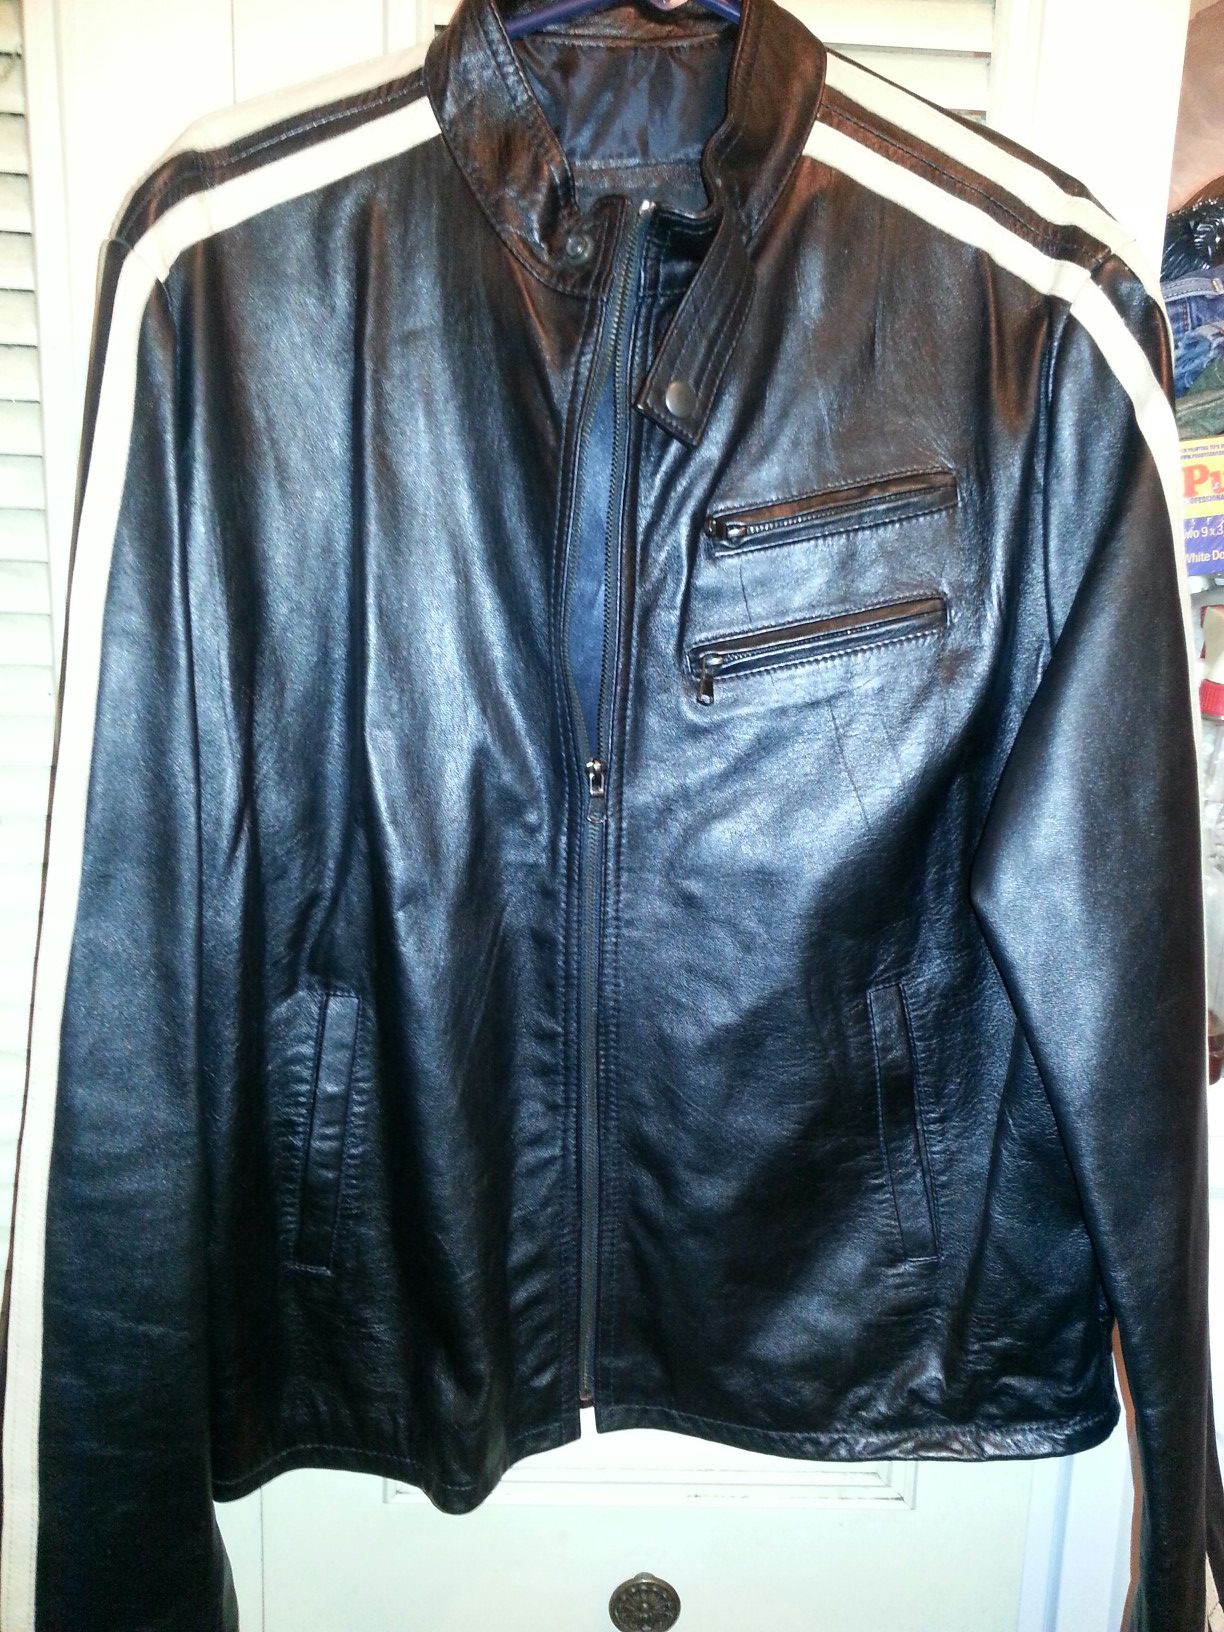 New lather riding jacket very nice